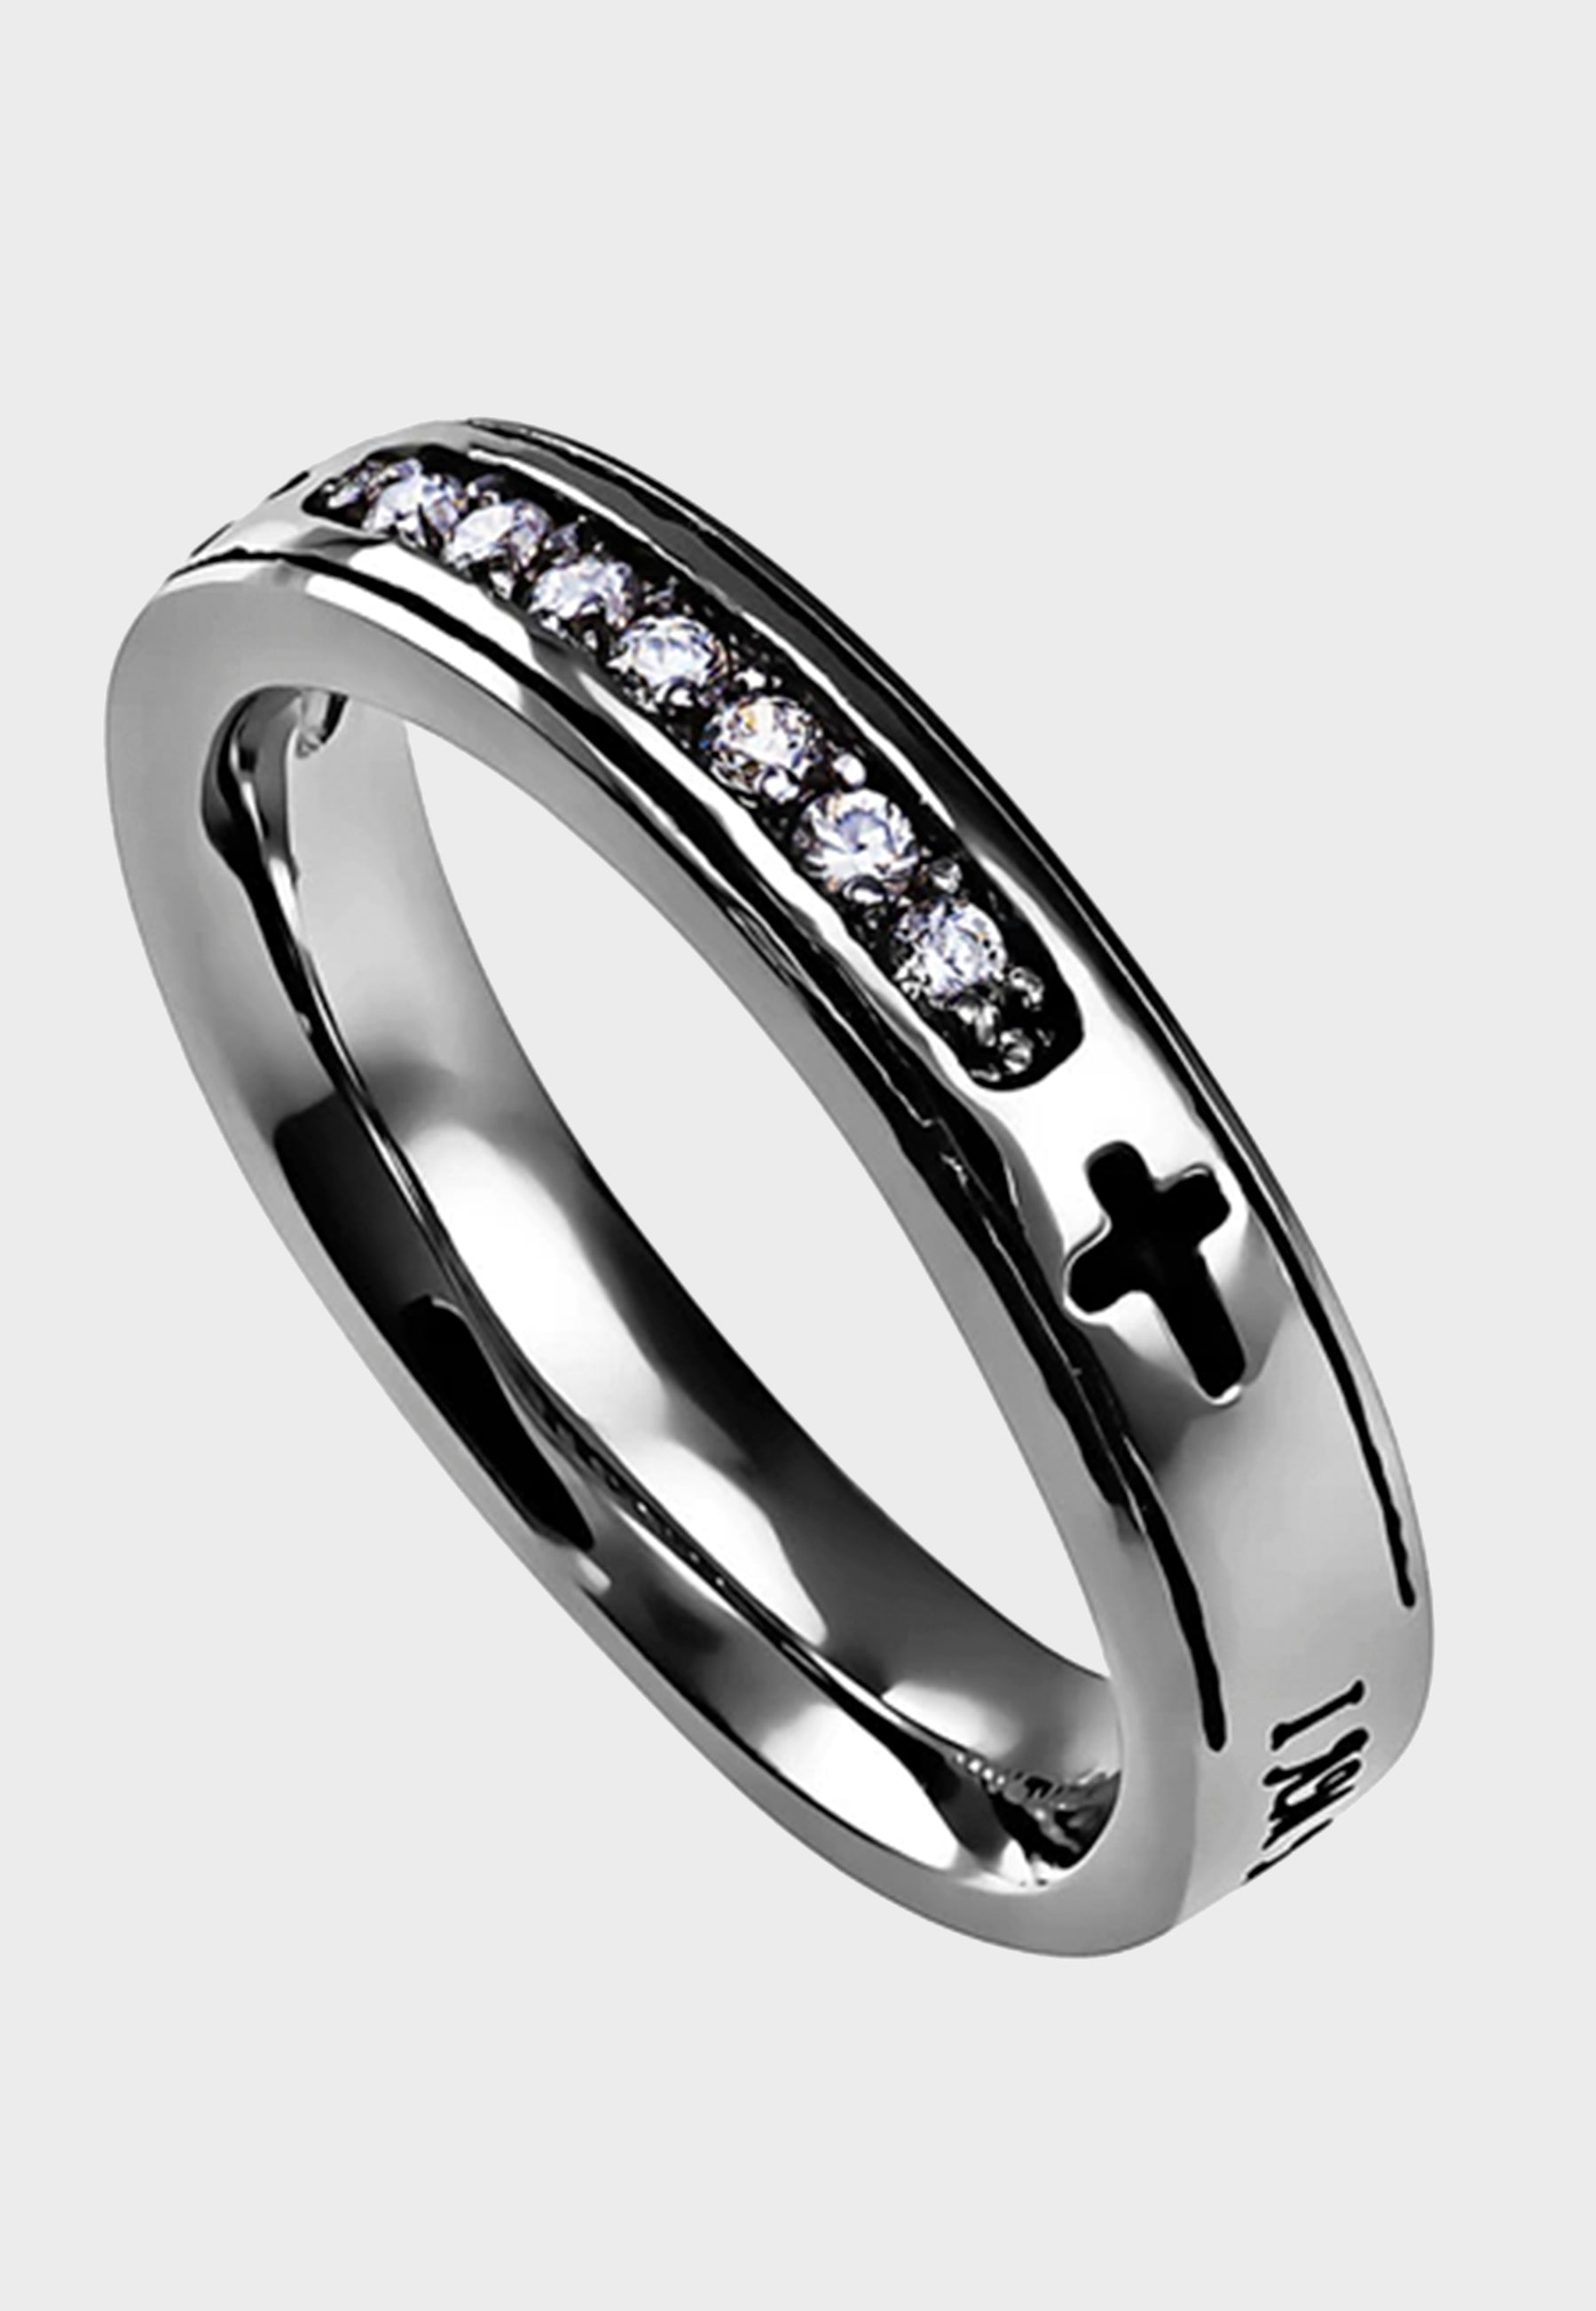 Women's Christian ring with inlays and verse